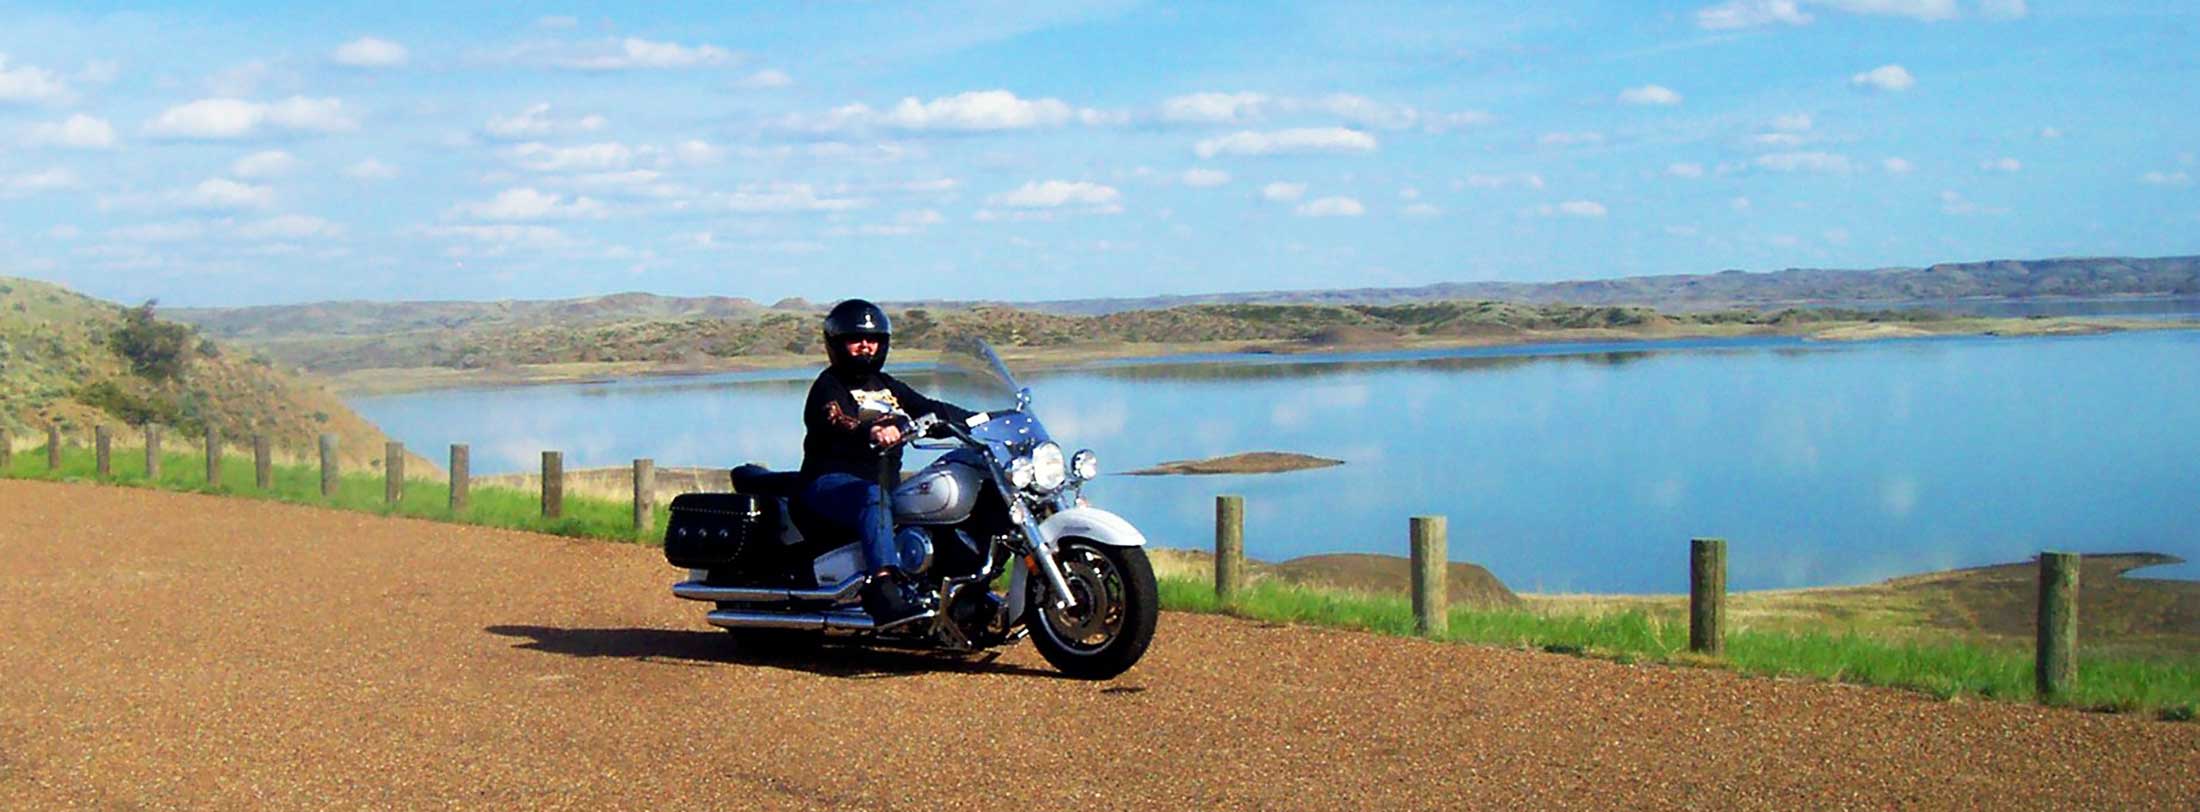 Motorcycles in Montana's Missouri River Country